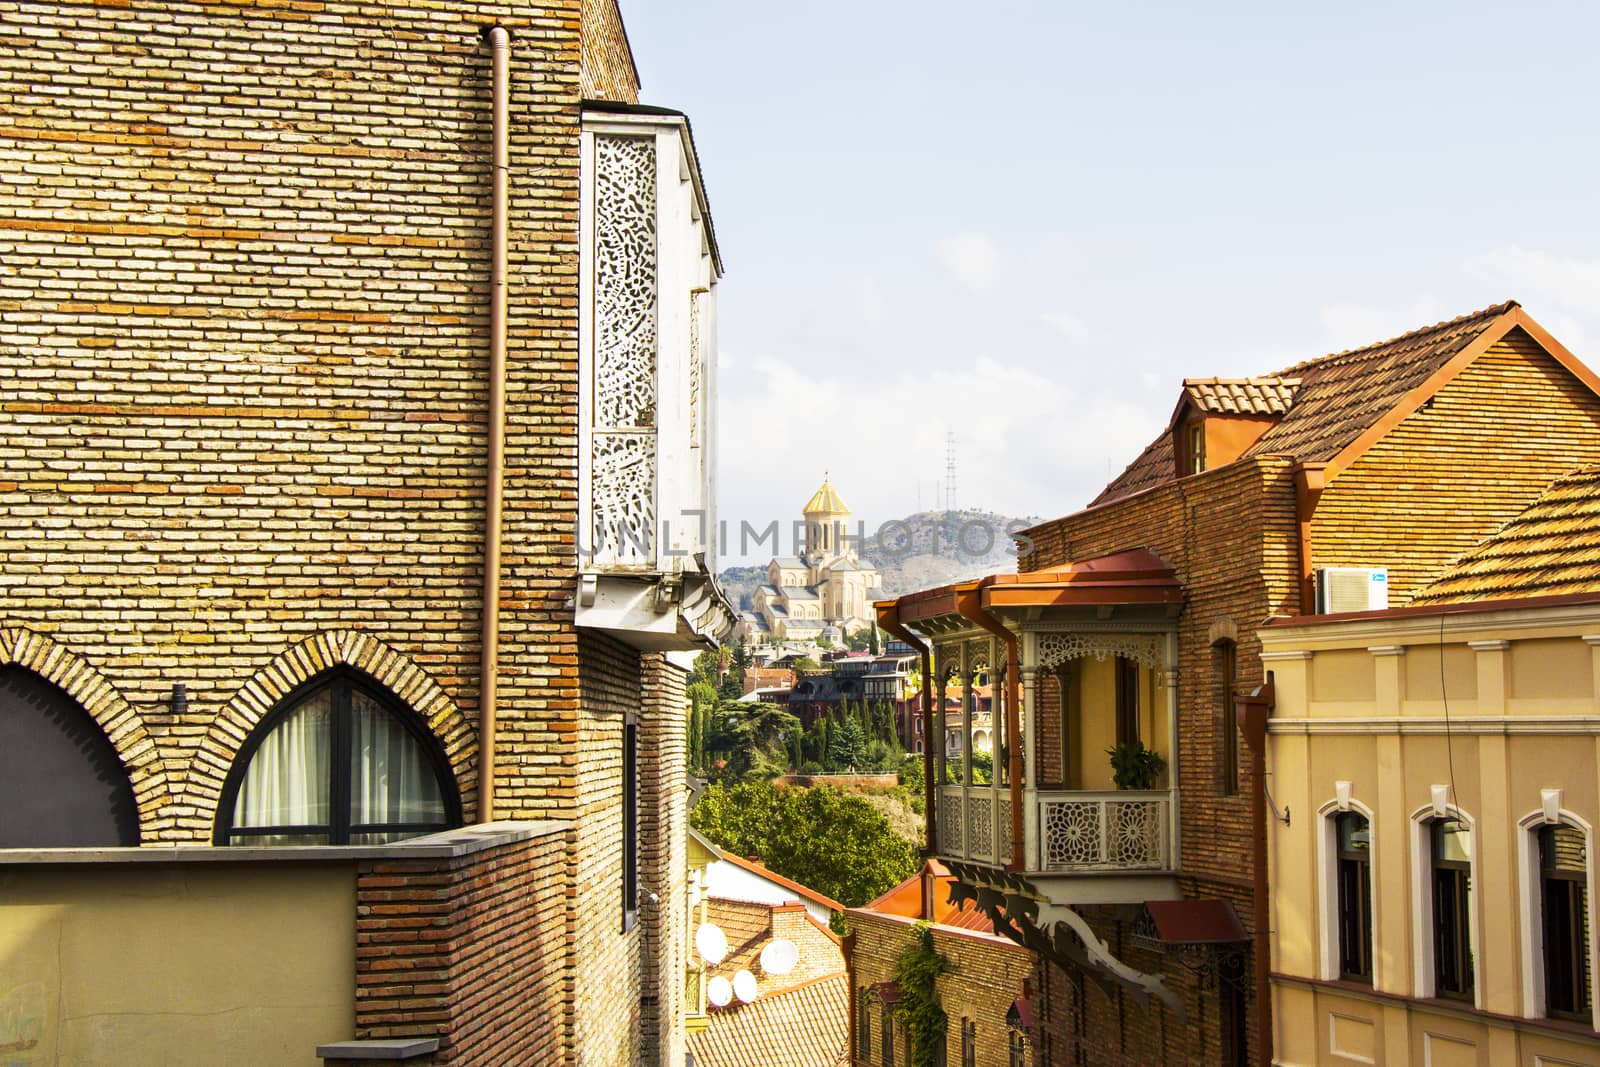 Tbilisi Botanical street, old famous houses and city view, old famous street in old town by Taidundua